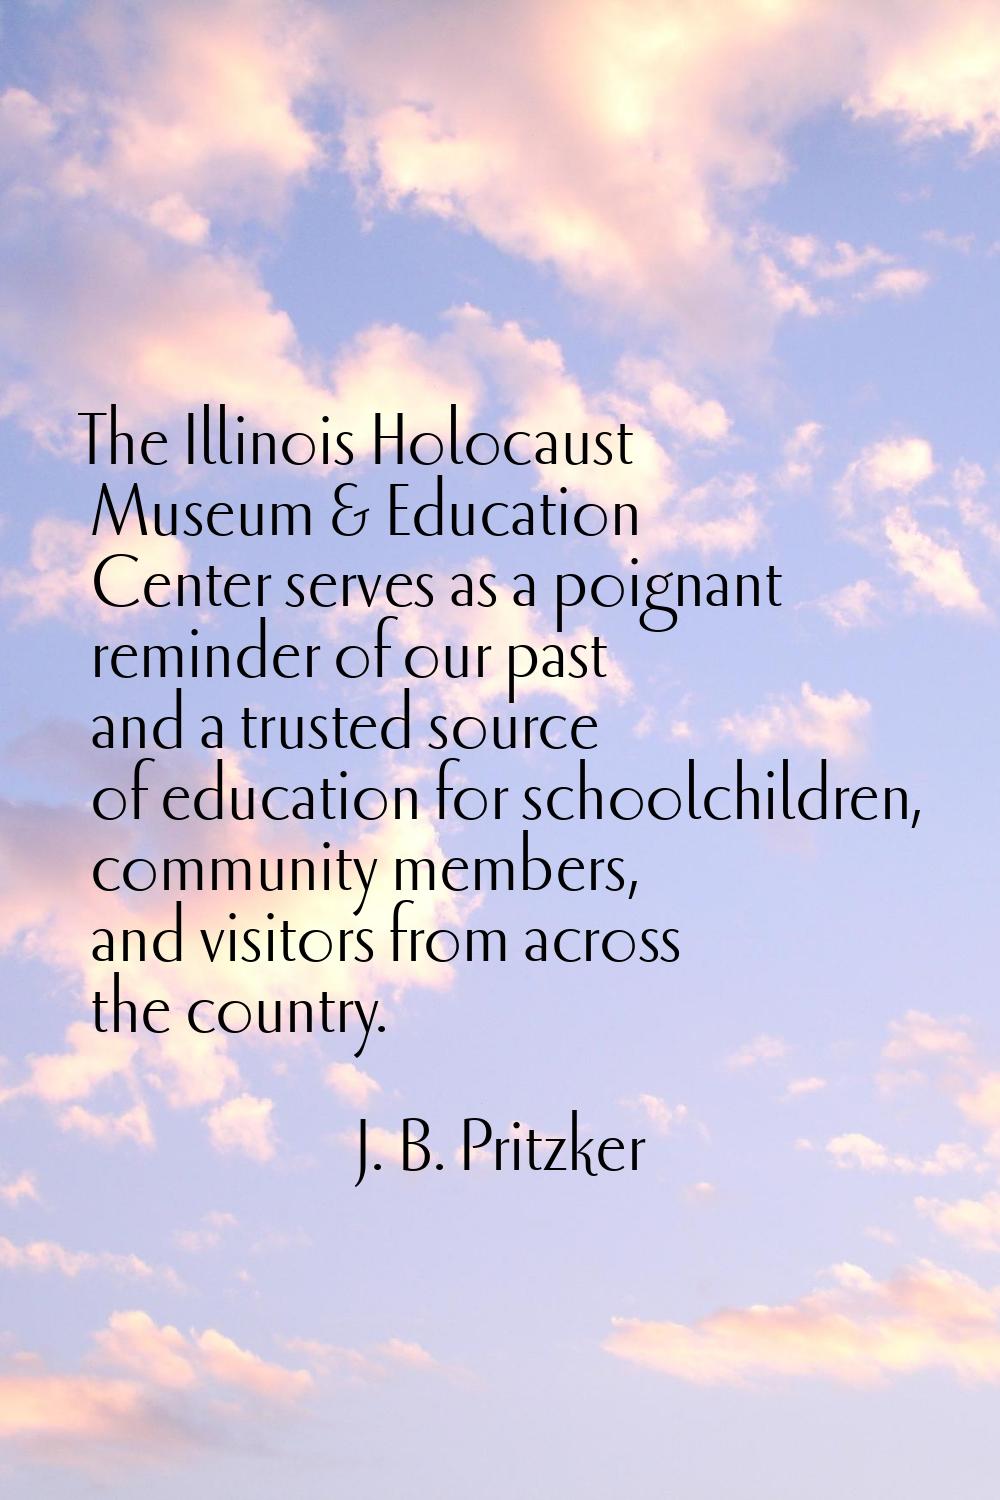 The Illinois Holocaust Museum & Education Center serves as a poignant reminder of our past and a tr